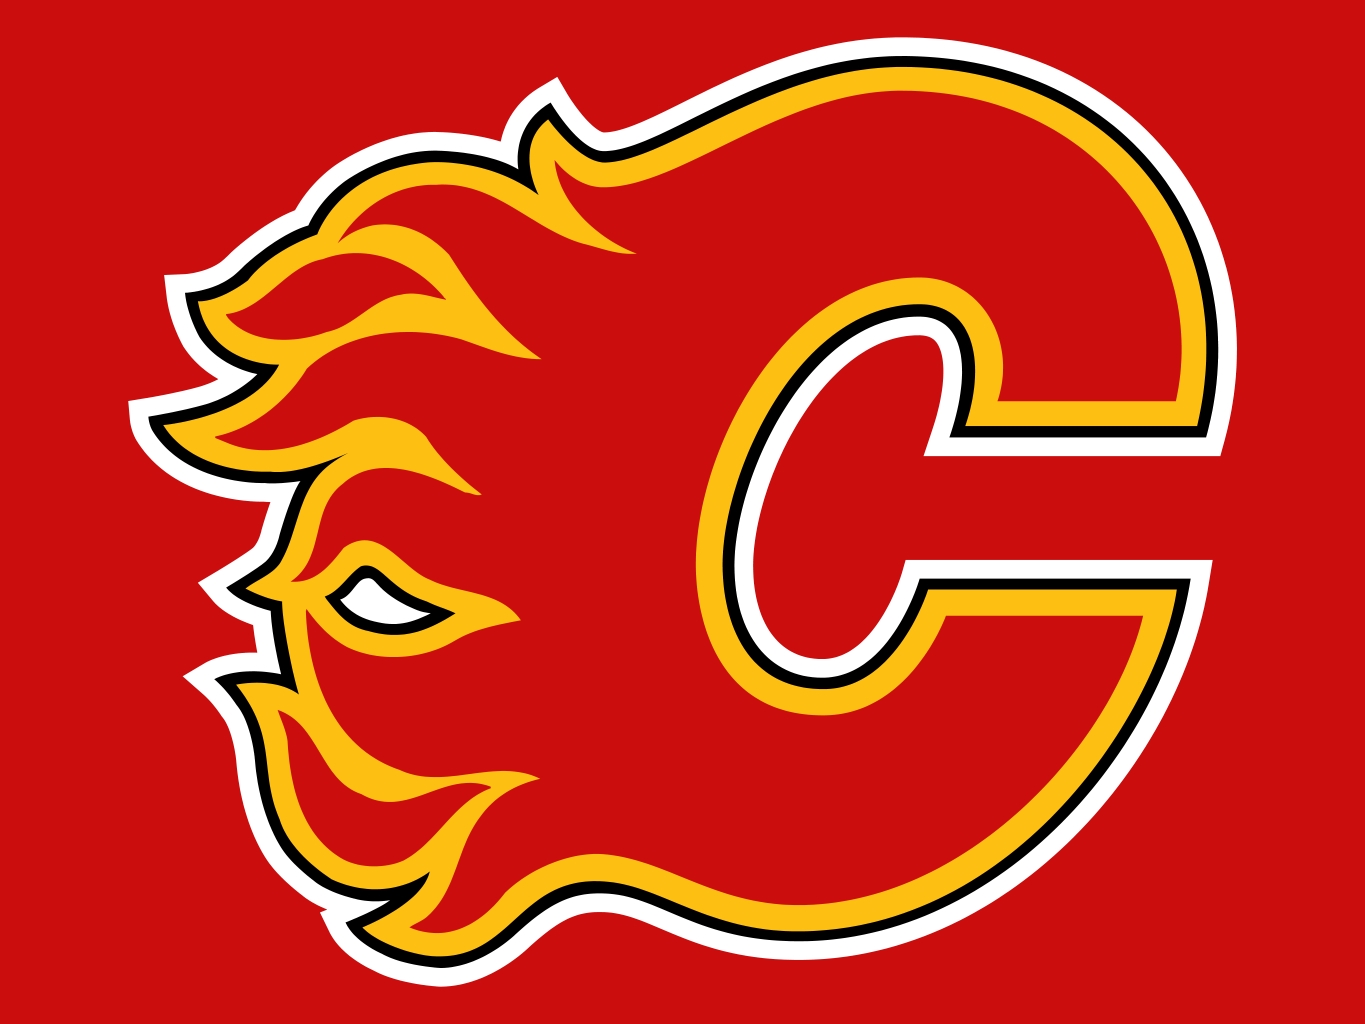 Wallpapers Of The Day: Calgary Flames | 1365x1024px Calgary Flames ...